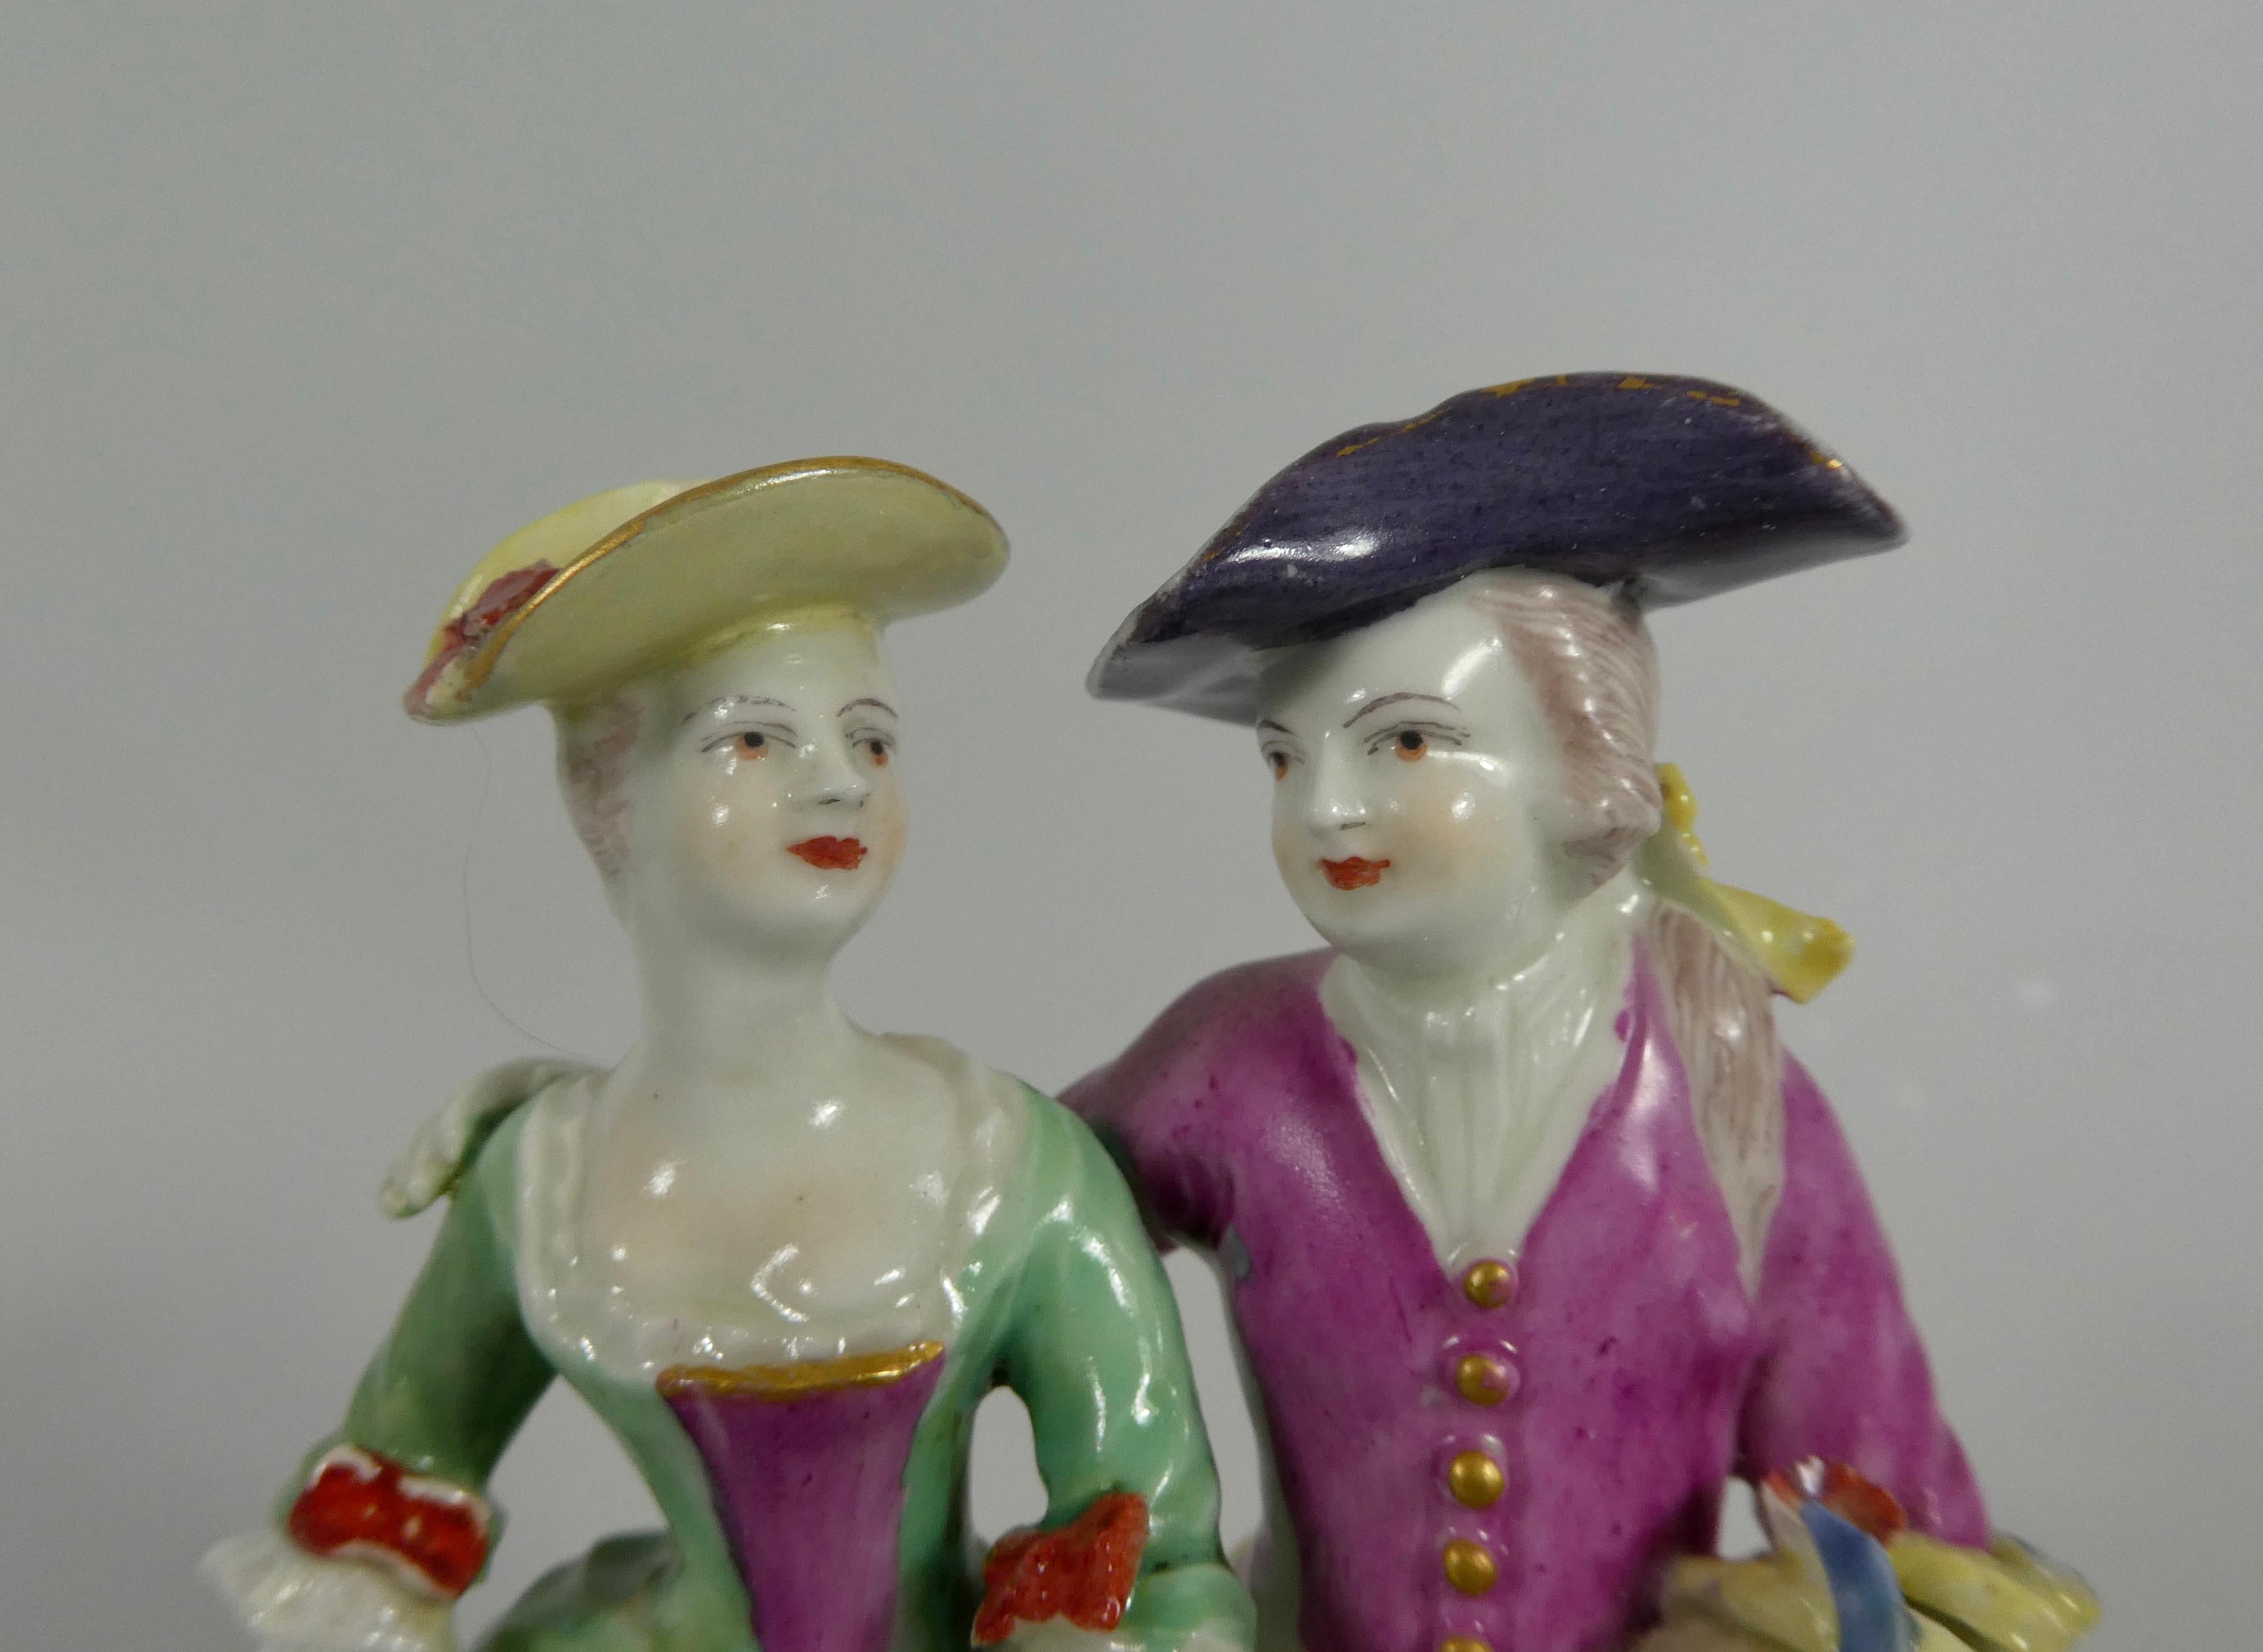 A fine Derby Porcelain group, circa 1765. Representing ‘Summer’ from the four seasons, the group beautifully modelled as a courting couple, in 18th century attire. The man carries a sickle and wheat sheafs, whilst his companion carries flowers. A